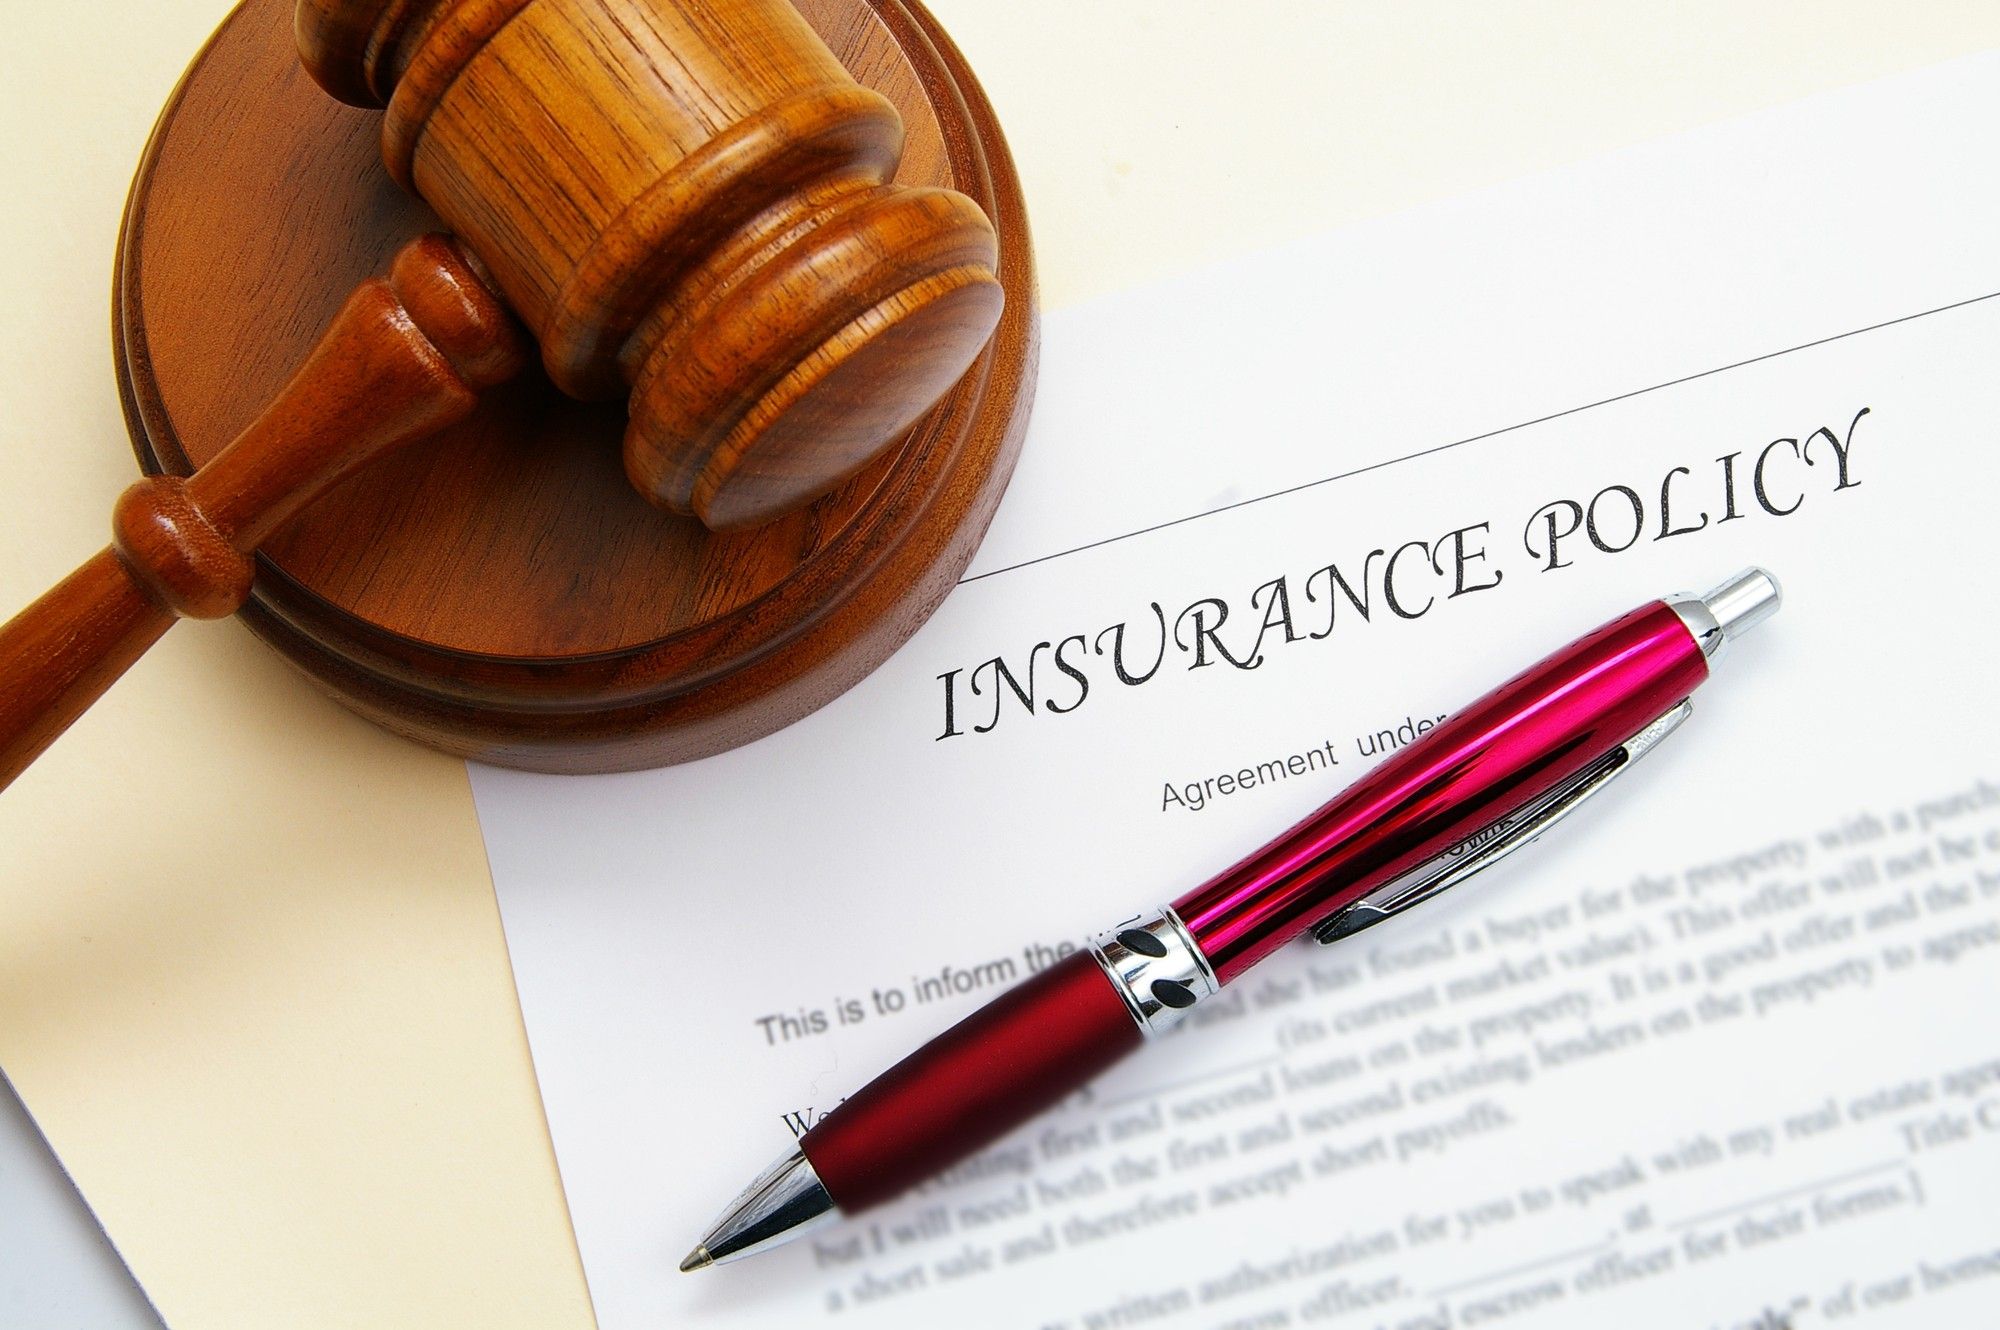 Life insurance laws vary by state